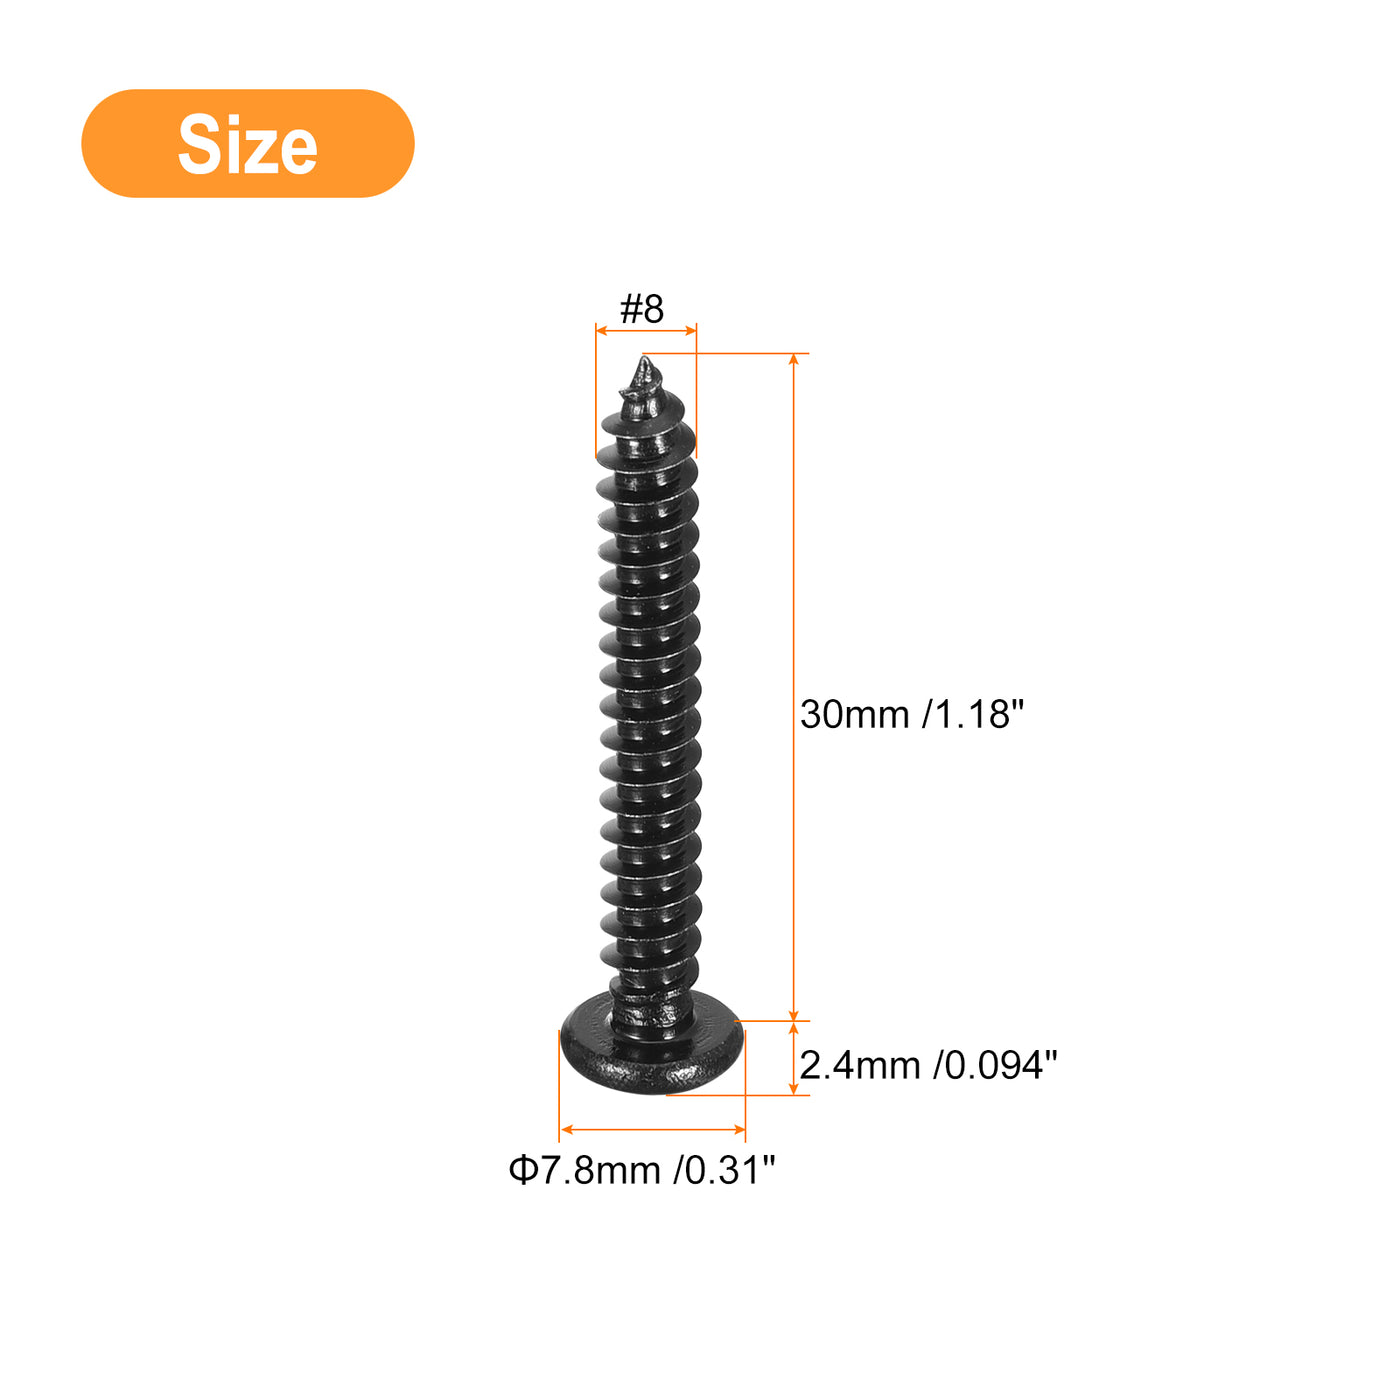 uxcell Uxcell #8 x 1-3/16" Phillips Pan Head Self-tapping Screw, 50pcs - 304 Stainless Steel Round Head Wood Screw Full Thread (Black)